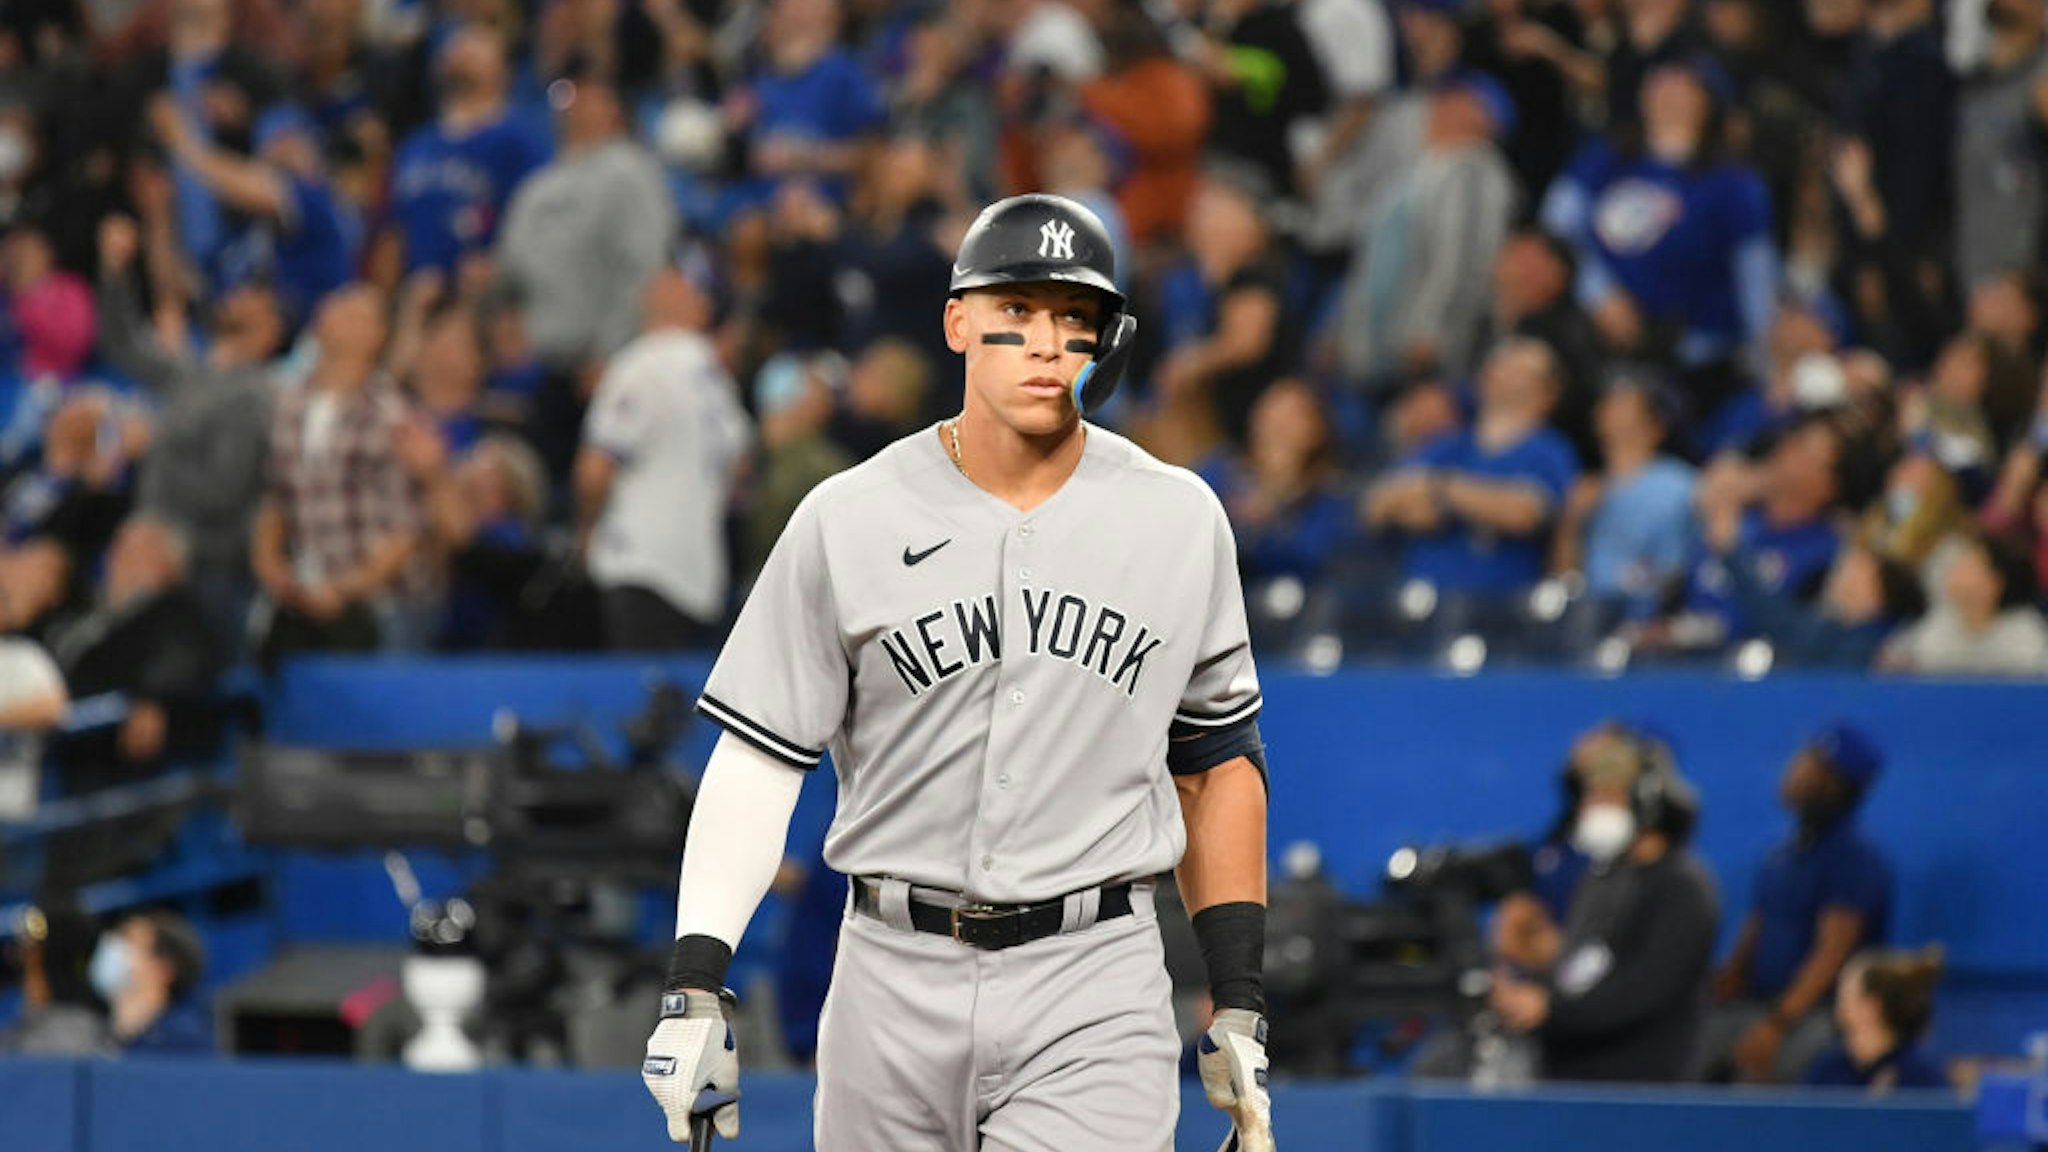 TORONTO, ON - MAY 03: New York Yankees right fielder Aaron Judge (99) walks back to base after hitting a foul ball during the MLB regular season game between the New York Yankees and the Toronto Blue Jays on May 03, 2022, at Rogers Center in Toronto, ON, Canada. (Photo by Gavin Napier/Icon Sportswire via Getty Images)